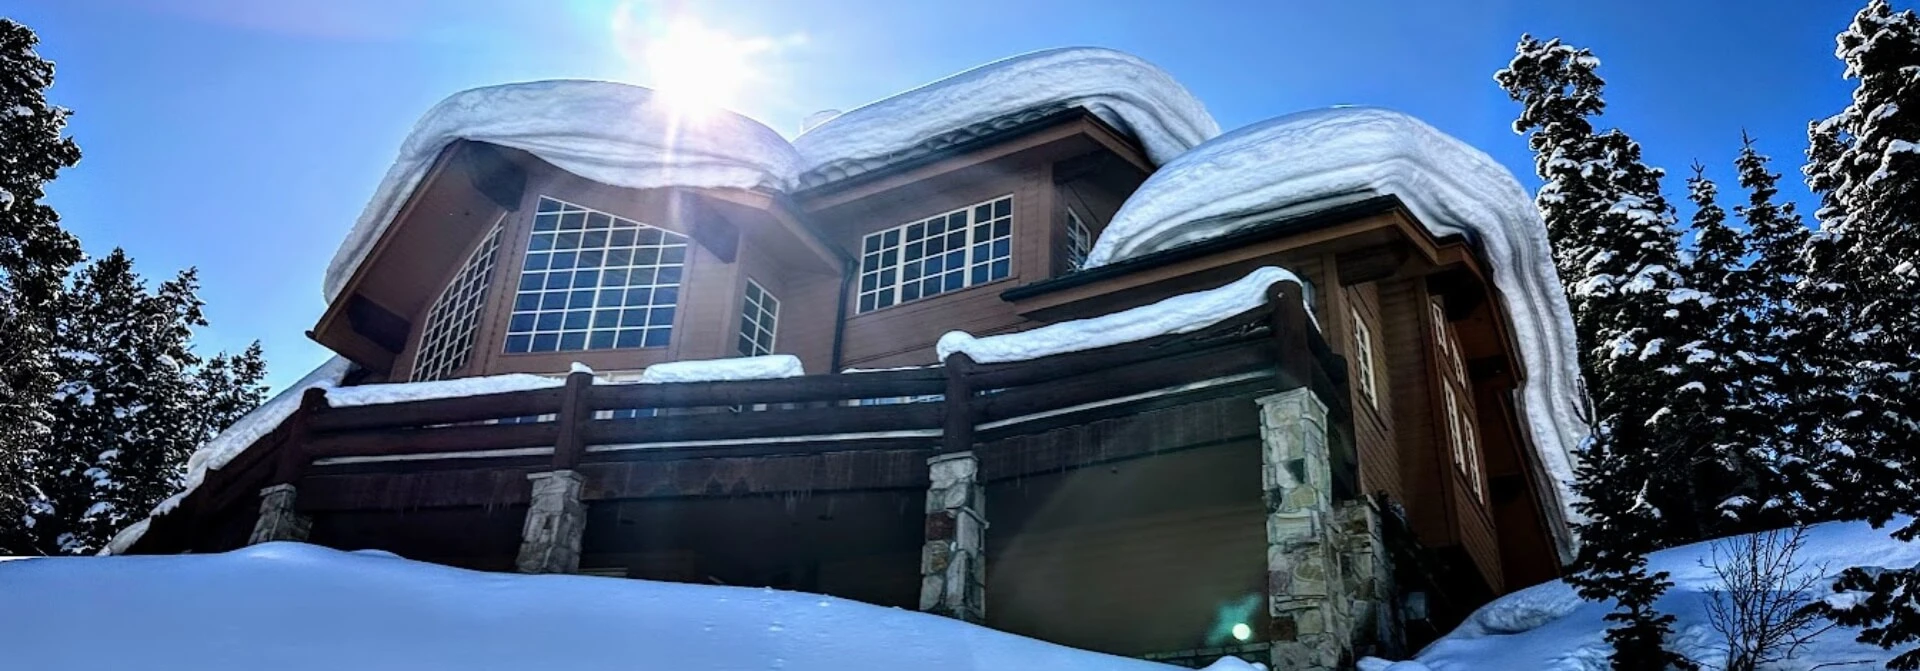 Home in Deer Valley Covered With Snow